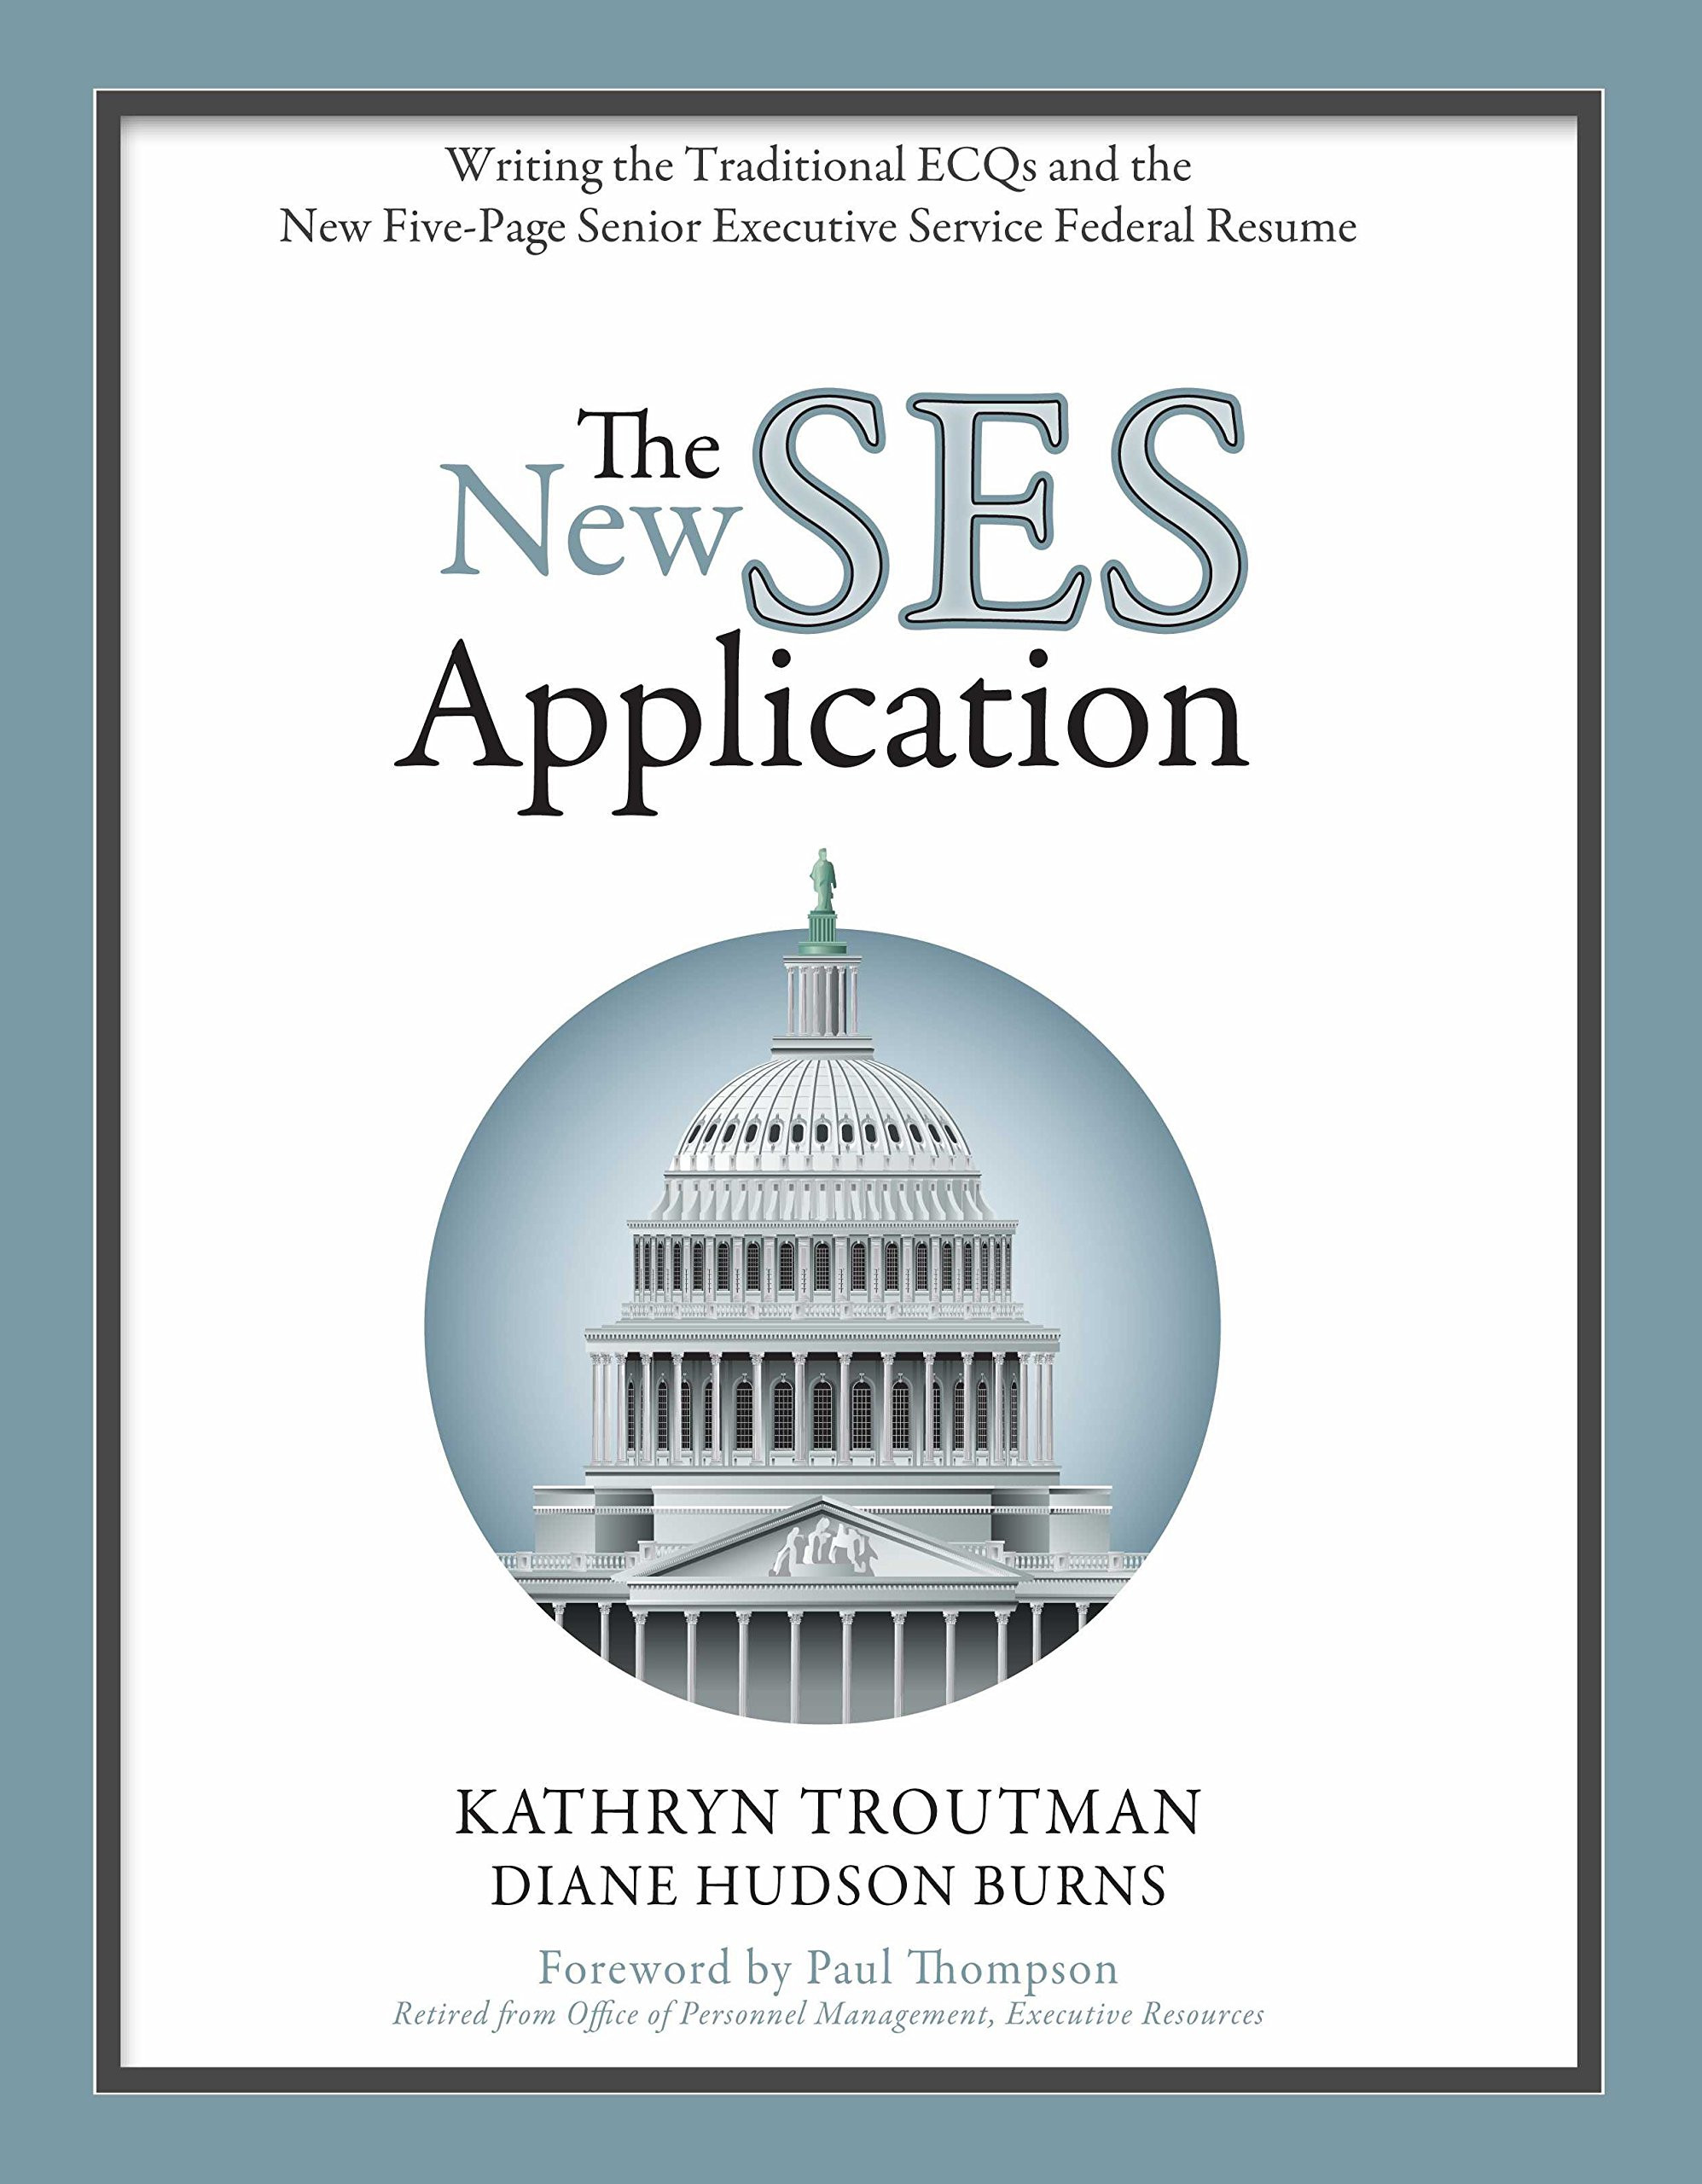 Sample Of A Federal Resume Kathryn Troutman the New Ses Application: Writing the Traditional Ecqs and the New …